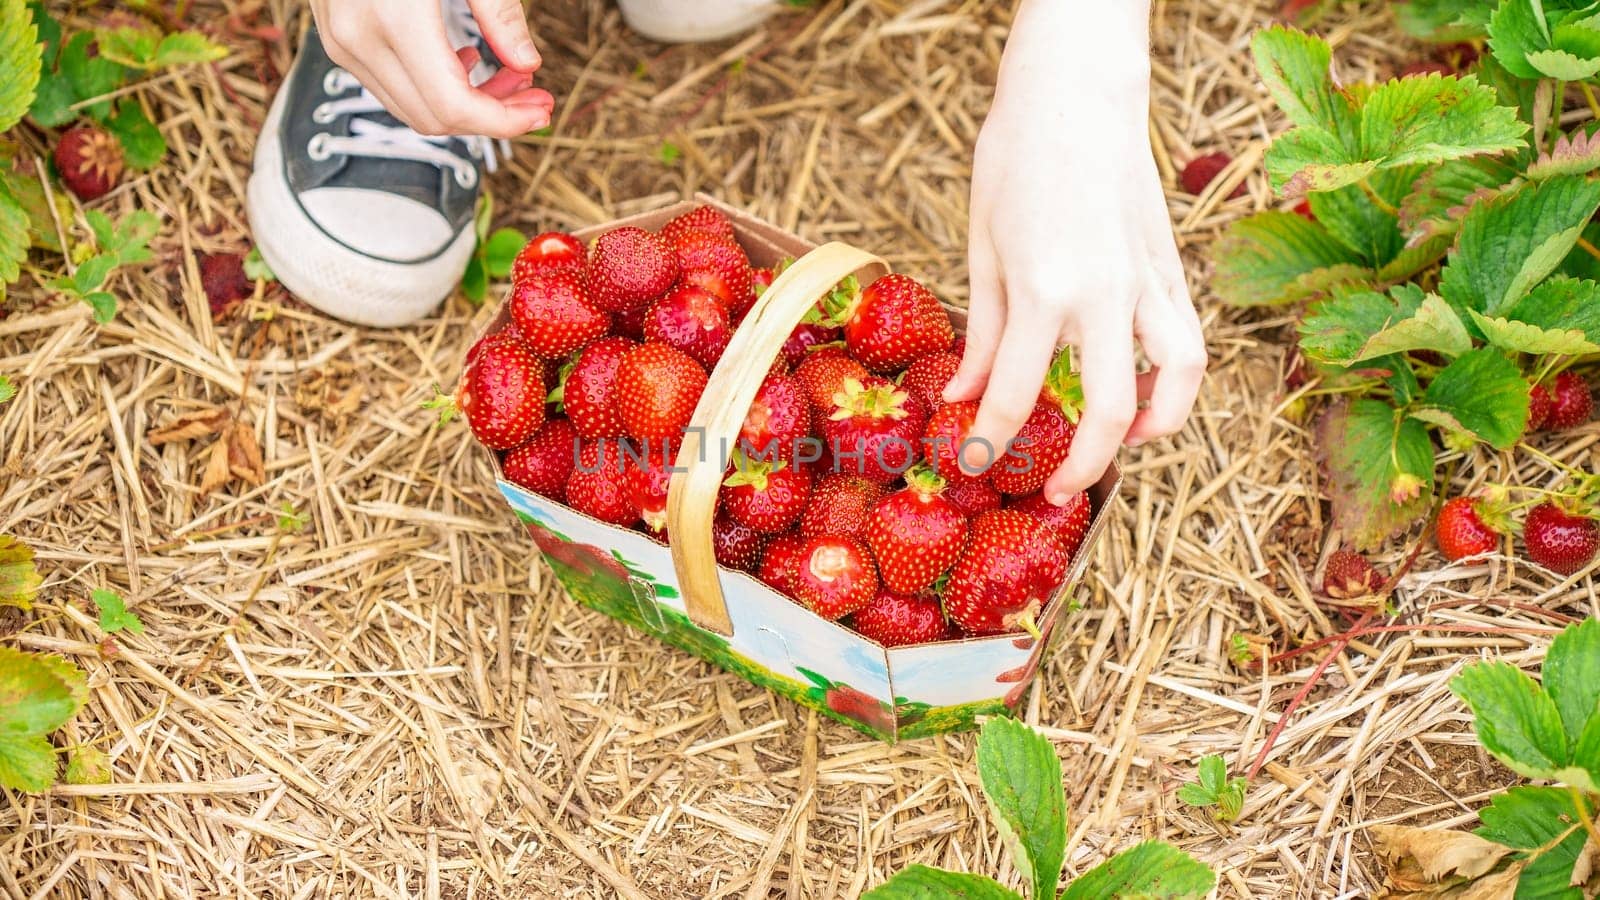 Full basket with fresh red strawberries after harvest on ground next to black shoes on organic strawberry farm. Strawberries ready for export. Agriculture and ecological fruit farming concept by JuliaDorian